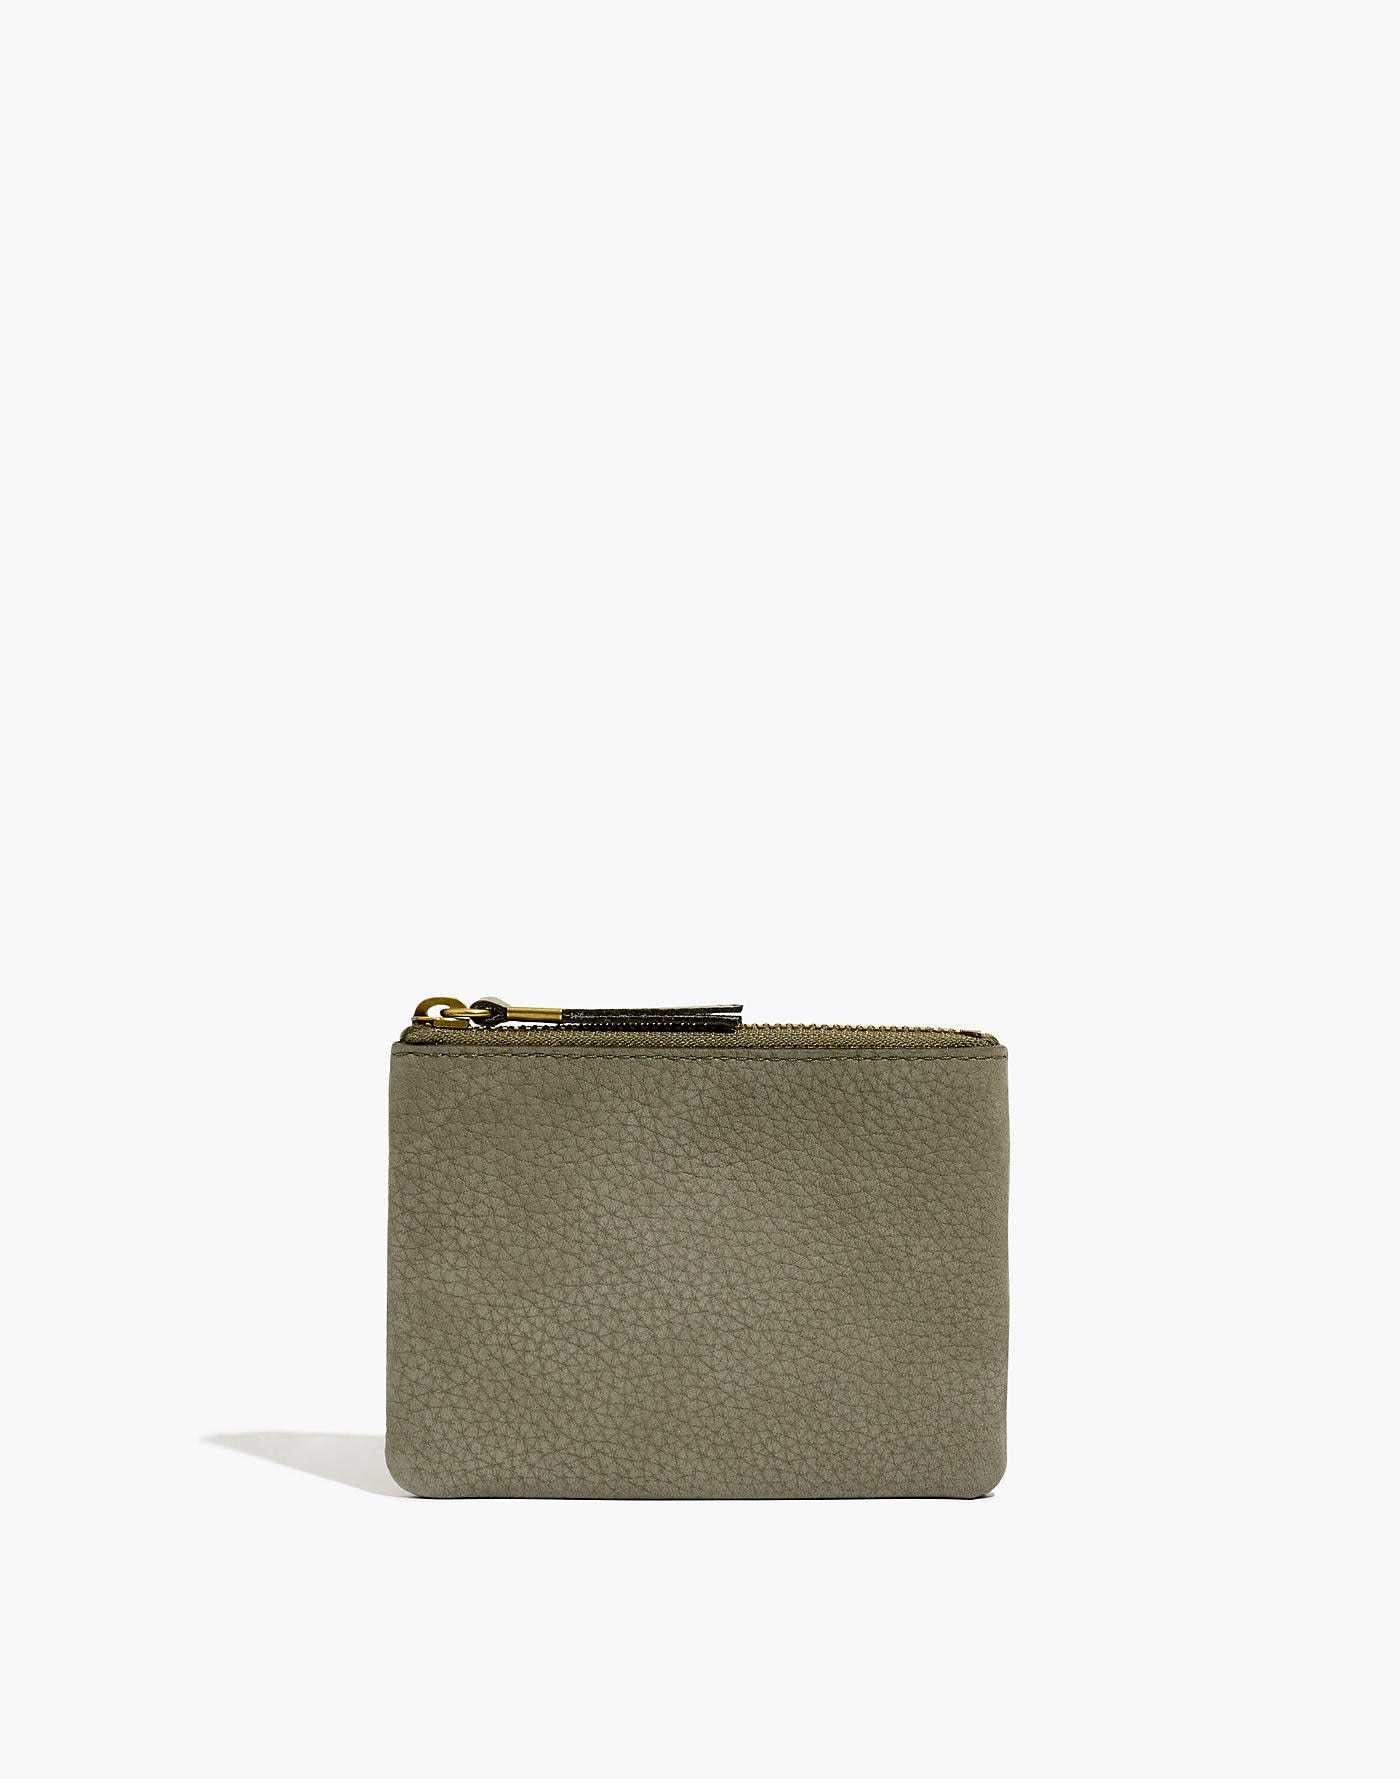 Angelica Station Madewell The Leather Pouch Wallet